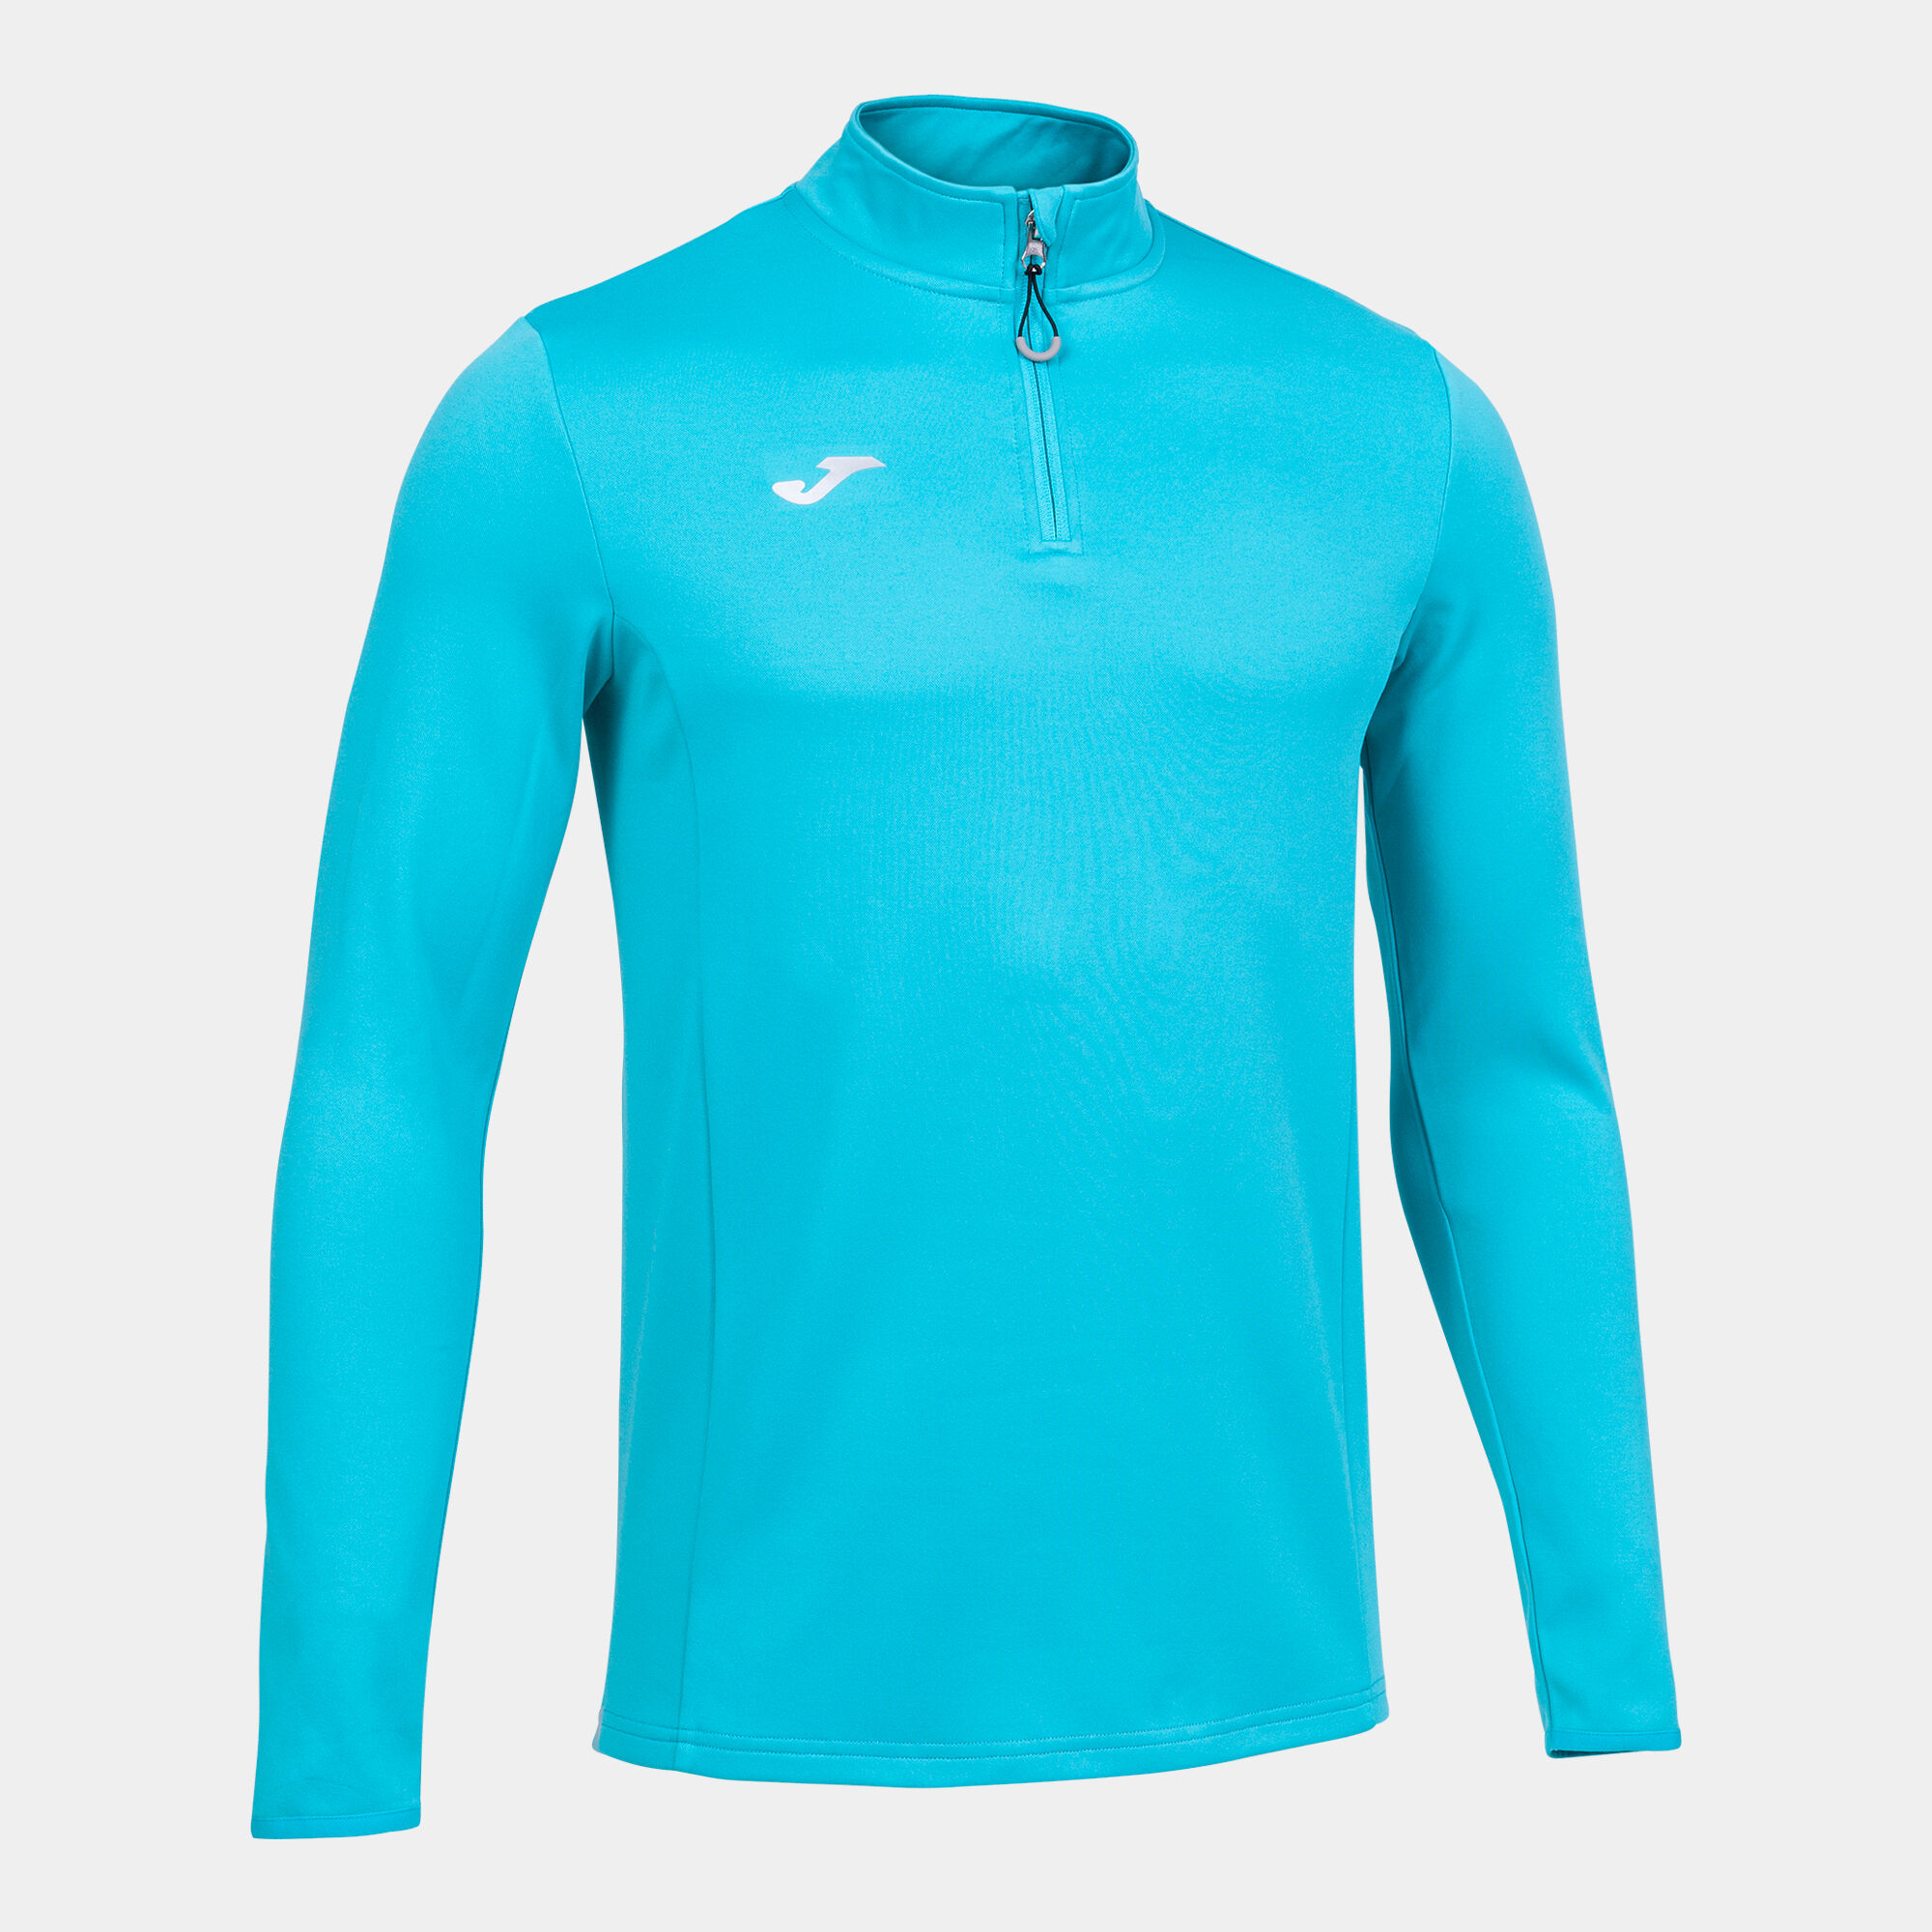 SWEAT-SHIRT HOMME RUNNING NIGHT TURQUOISE FLUO